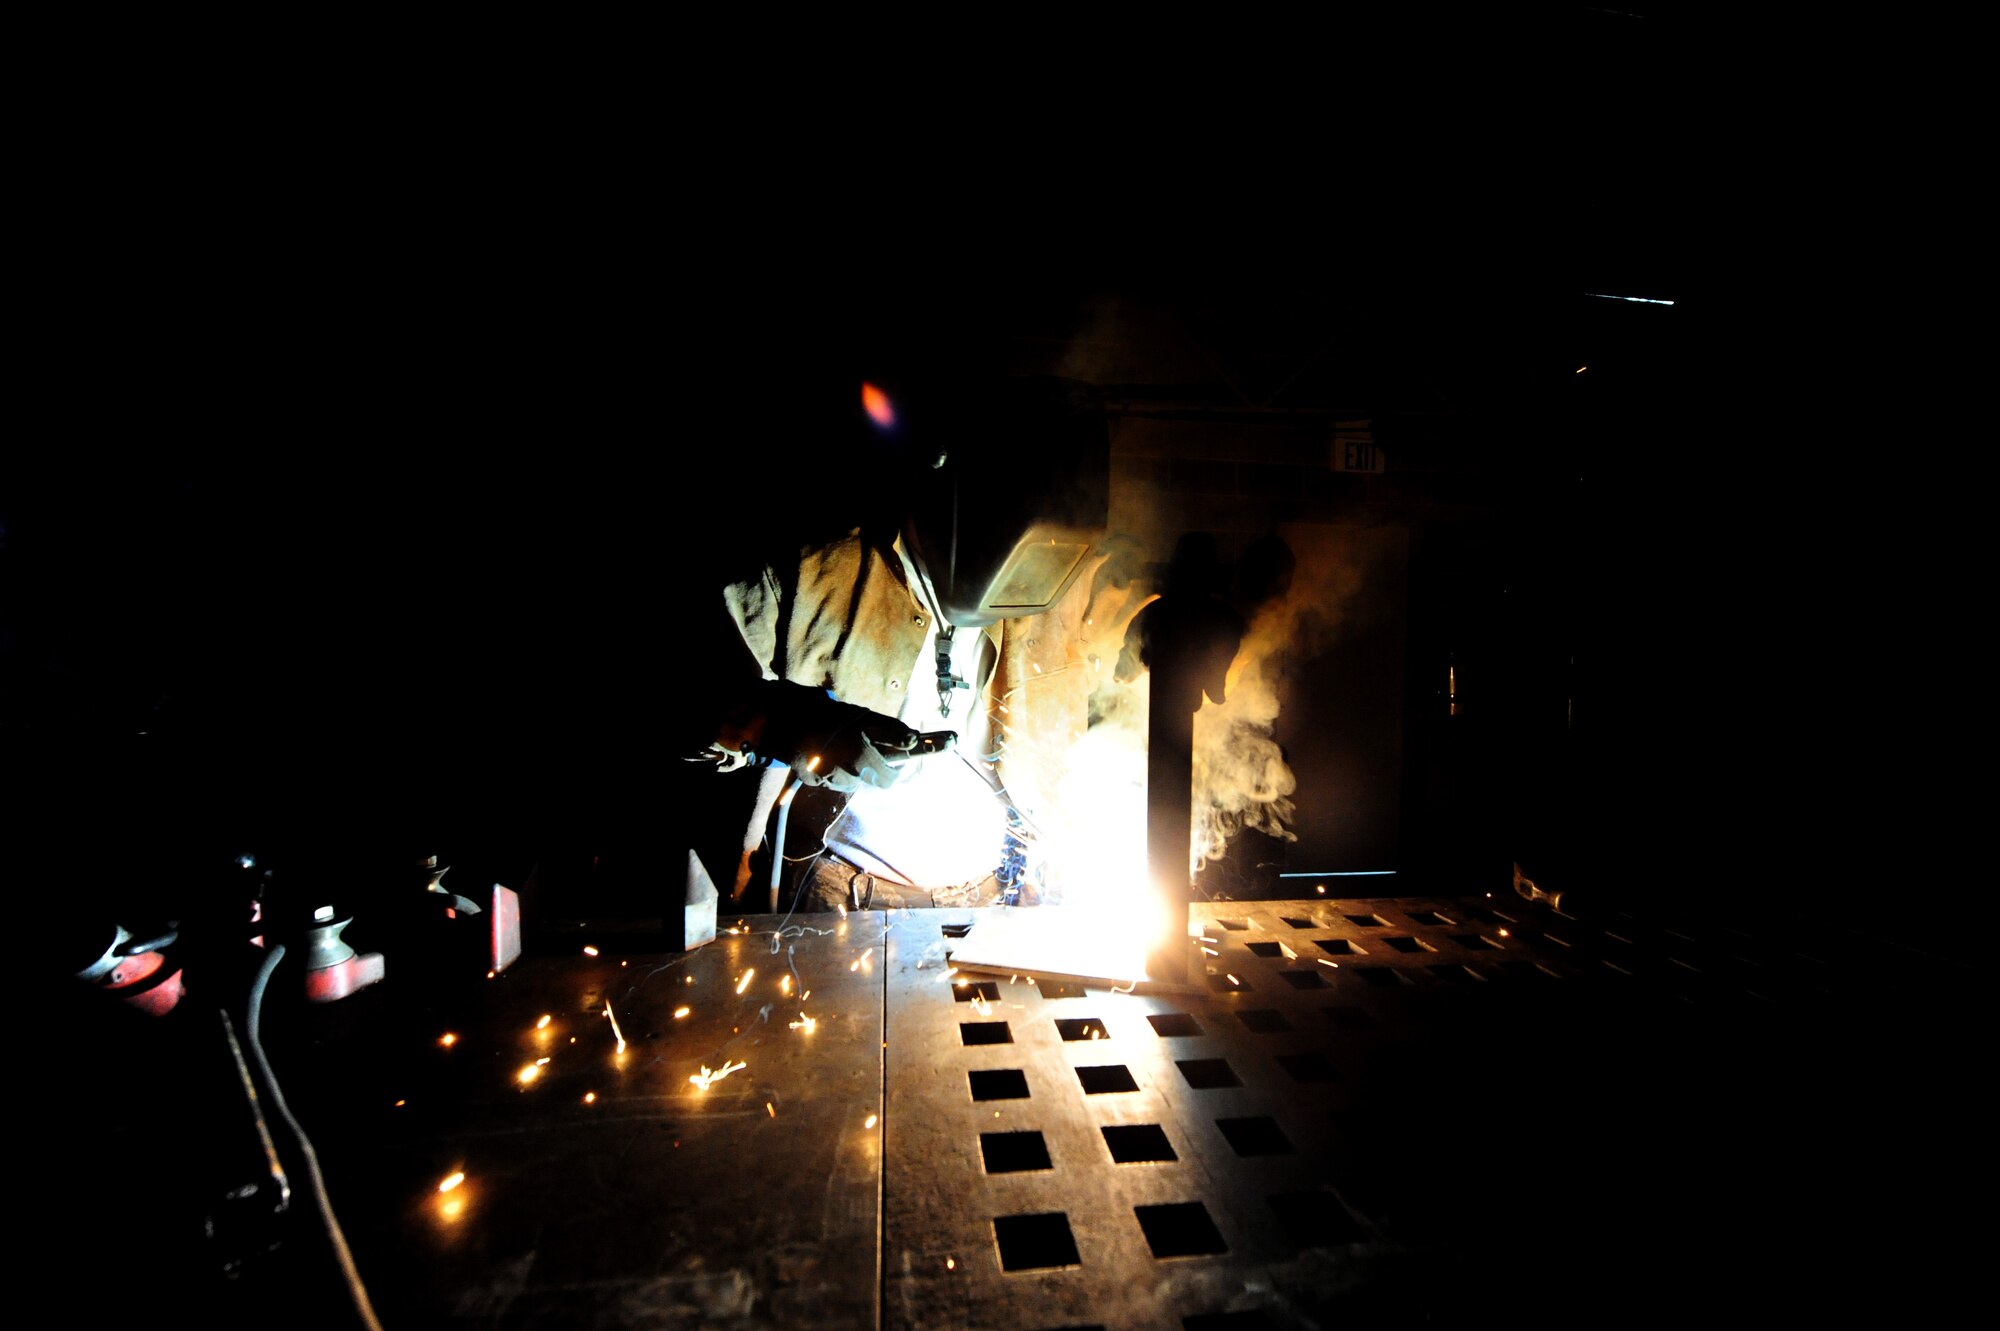 WHITEMAN AIR FORCE BASE, Mo. -- Staff Sgt. Adam Boyd, 509th Civil Engineer Squadron structural supervisor, welds a box blade for a snow plow, Feb. 27.  Structures Airmen perform jobs such as this one to save the Air Force from having to possibly spend money on parts made by civilian companies. (U.S. Air Force photo/Staff Sgt. Nick Wilson) (Released)